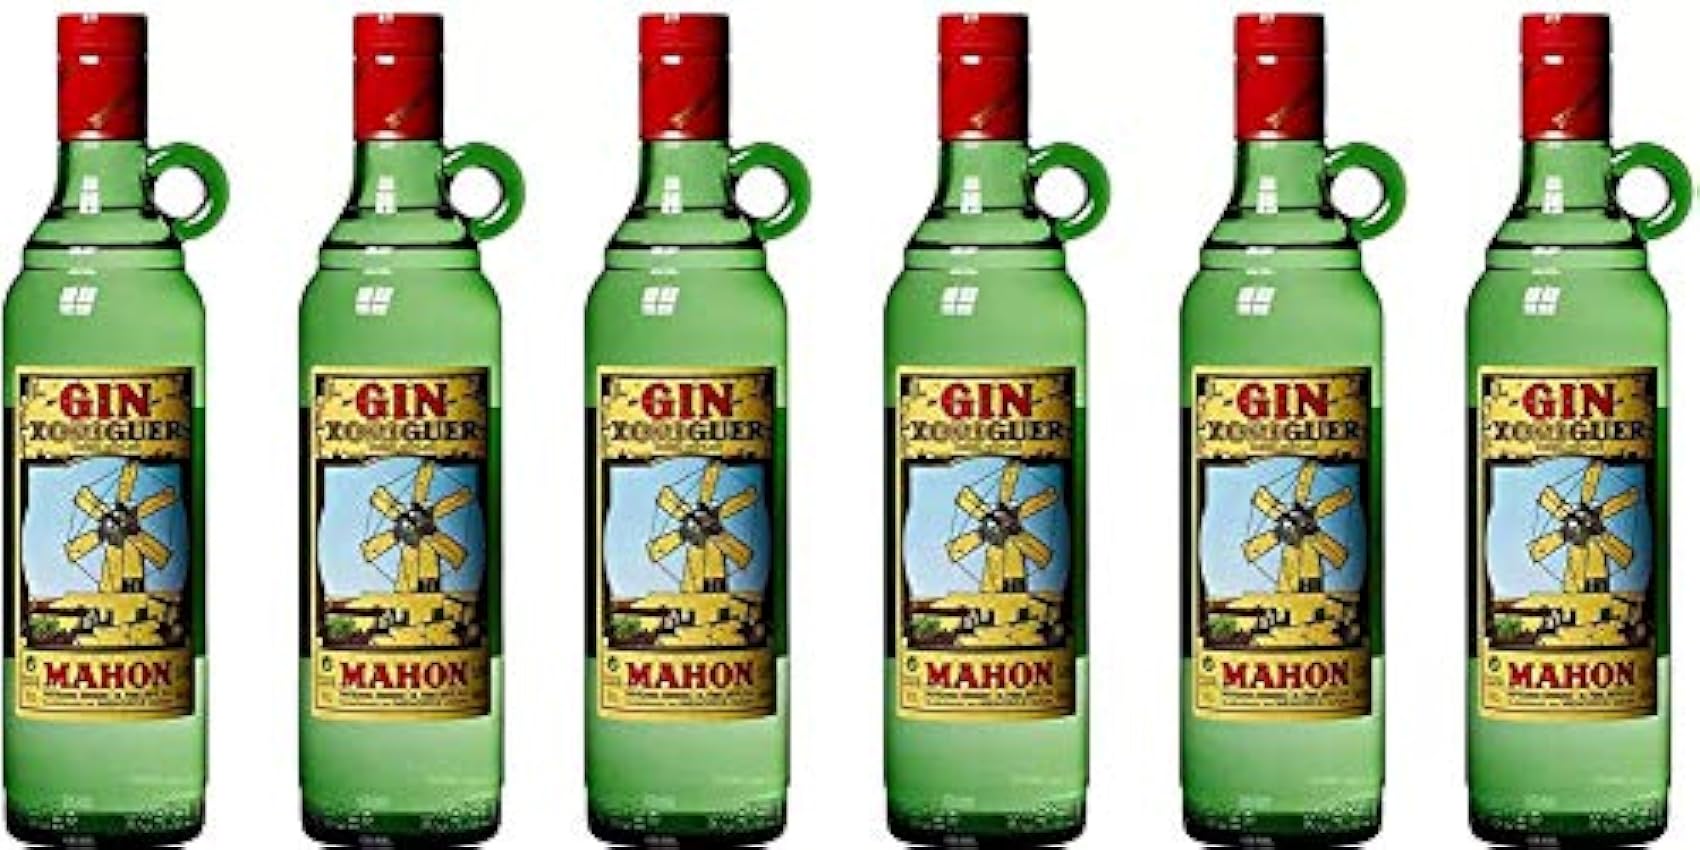 Gin Xoriguer Mahon 70cl 38° olOWR3Kd